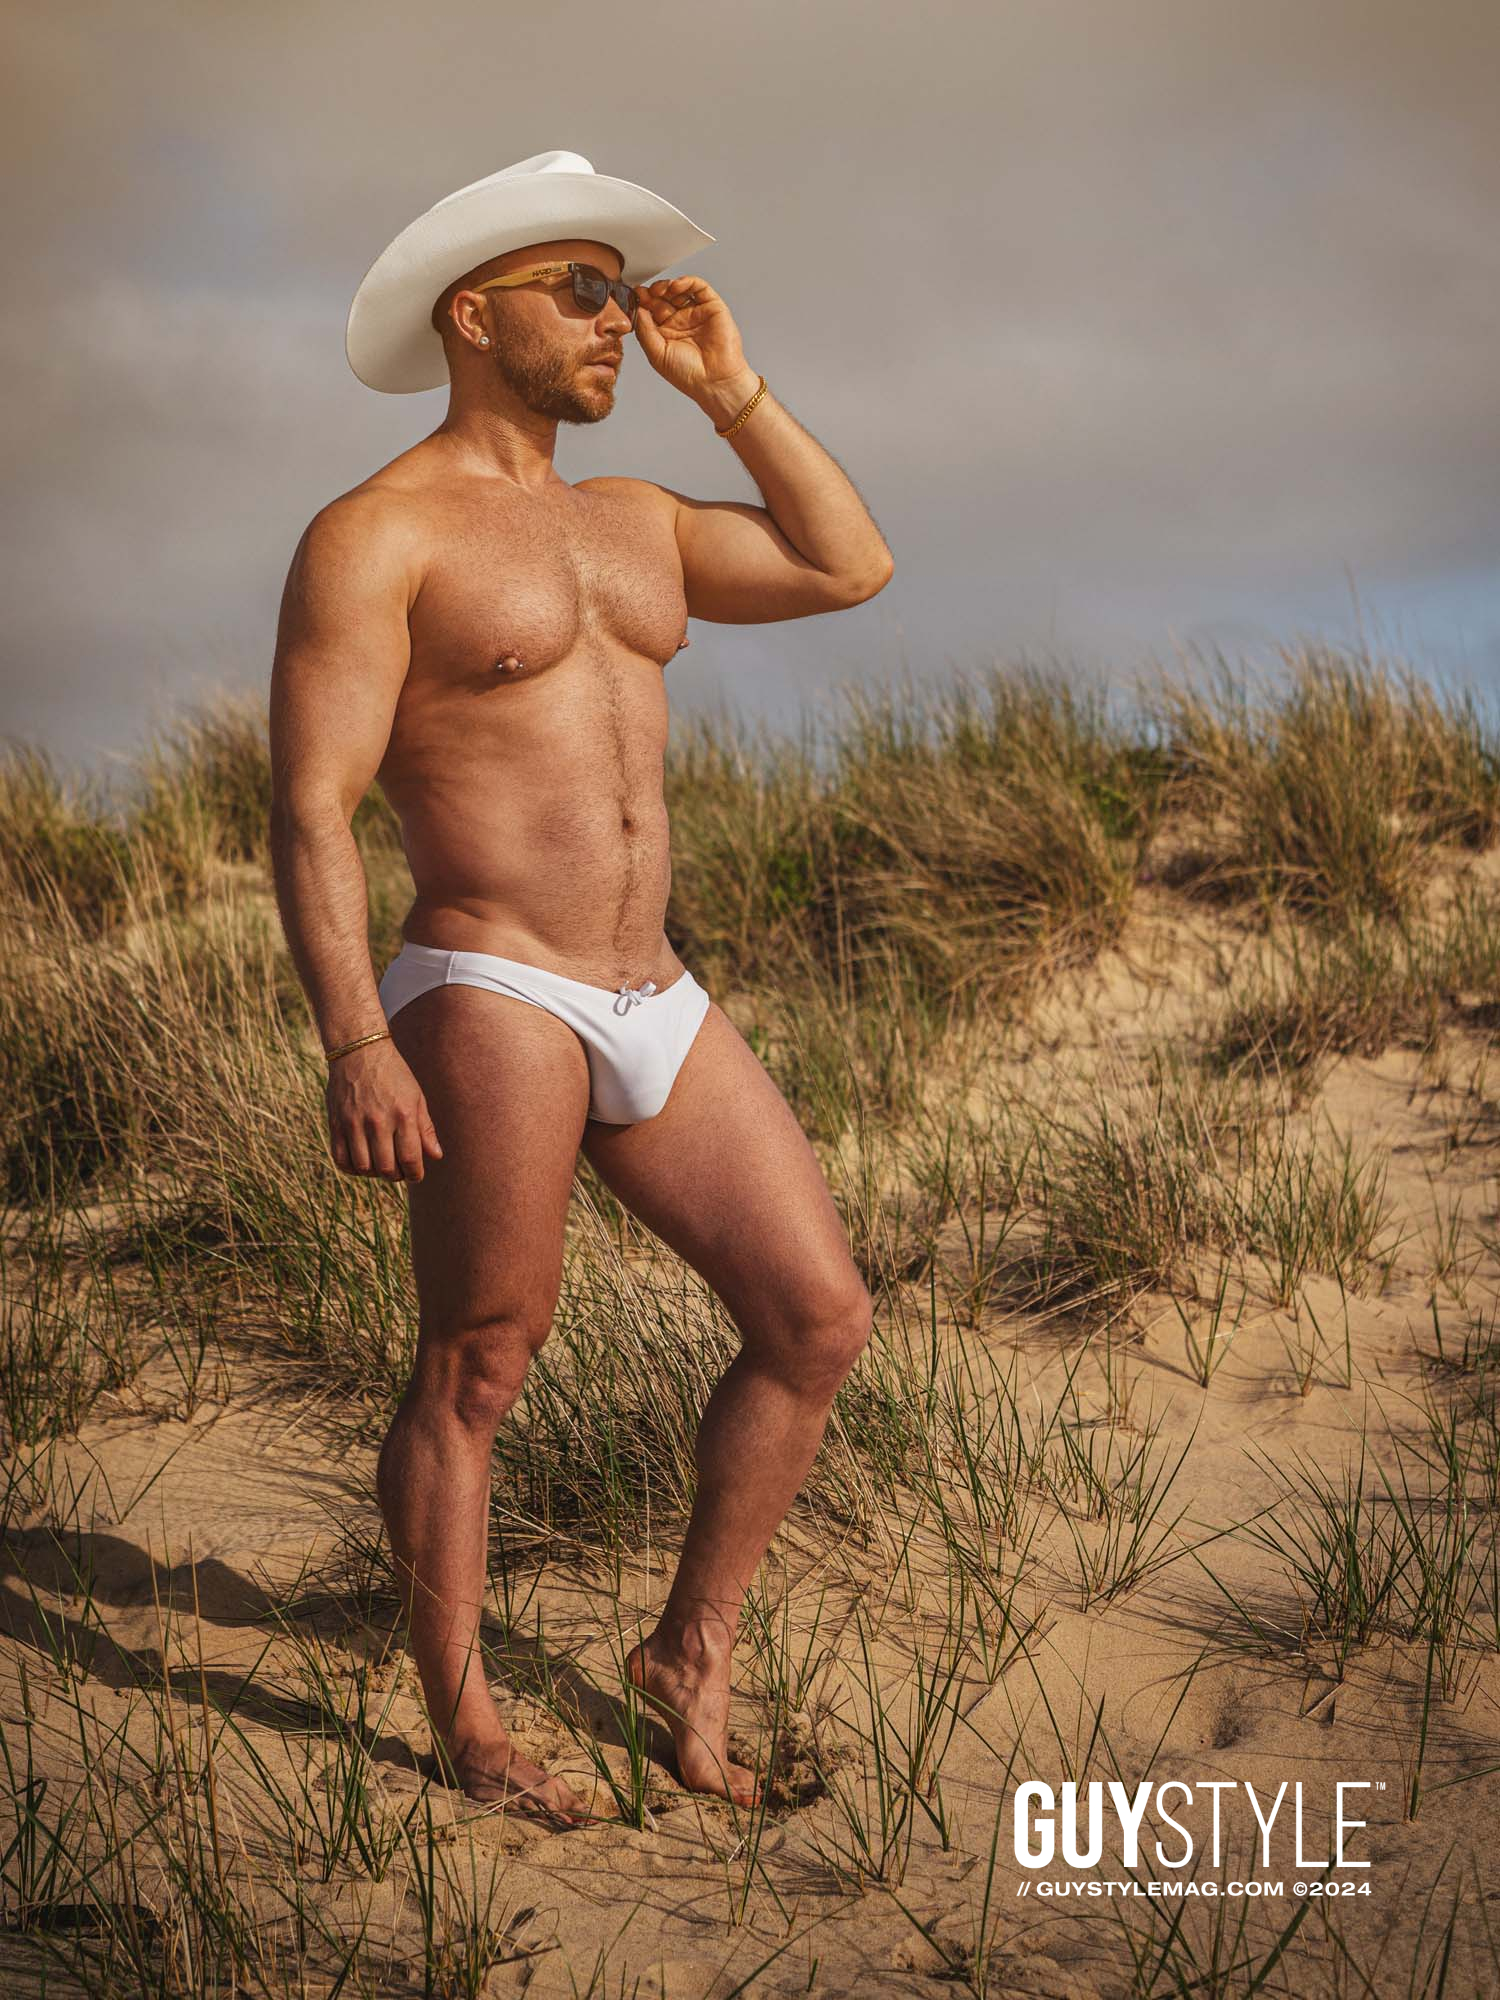 Discover the New Homoerotic Male Boudoir Photoshoot by Queer Artist Maxwell Alexander: Meet the Cocky Cowboy on the Sandy Beaches of East Hampton – Presented by HARD NEW YORK – Homoerotic Art Gallery and Prints Store